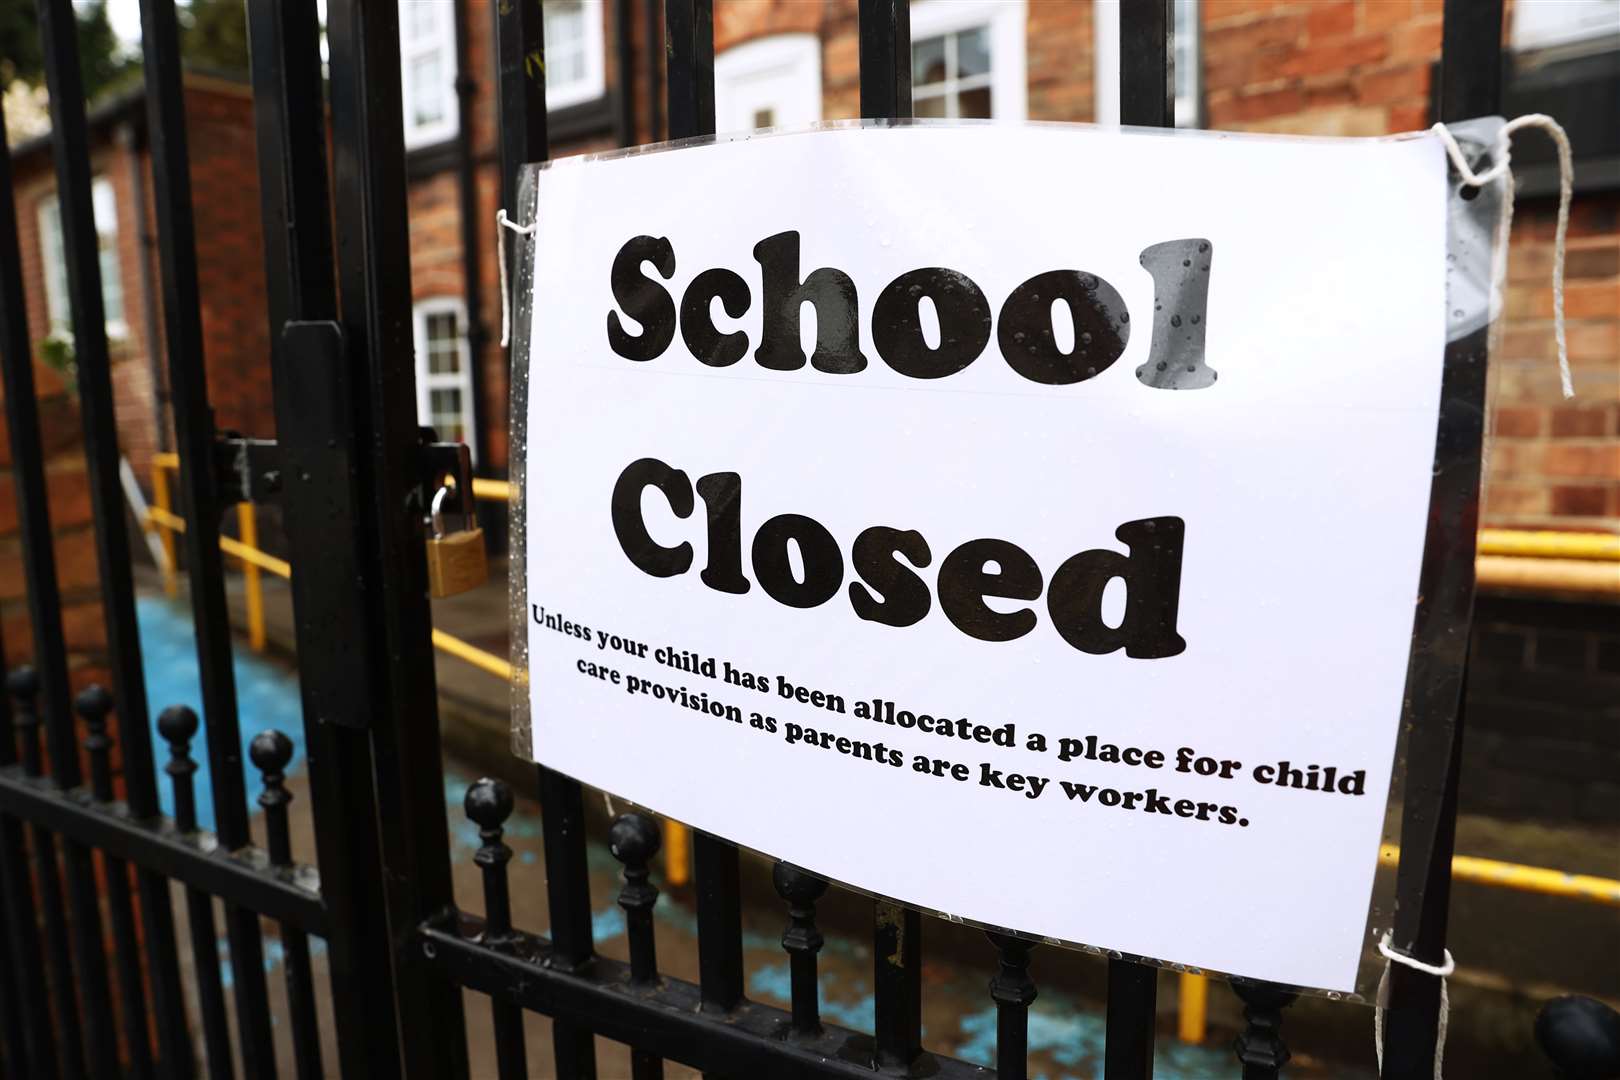 Wales’ First Minister has said schools there will not reopen in June